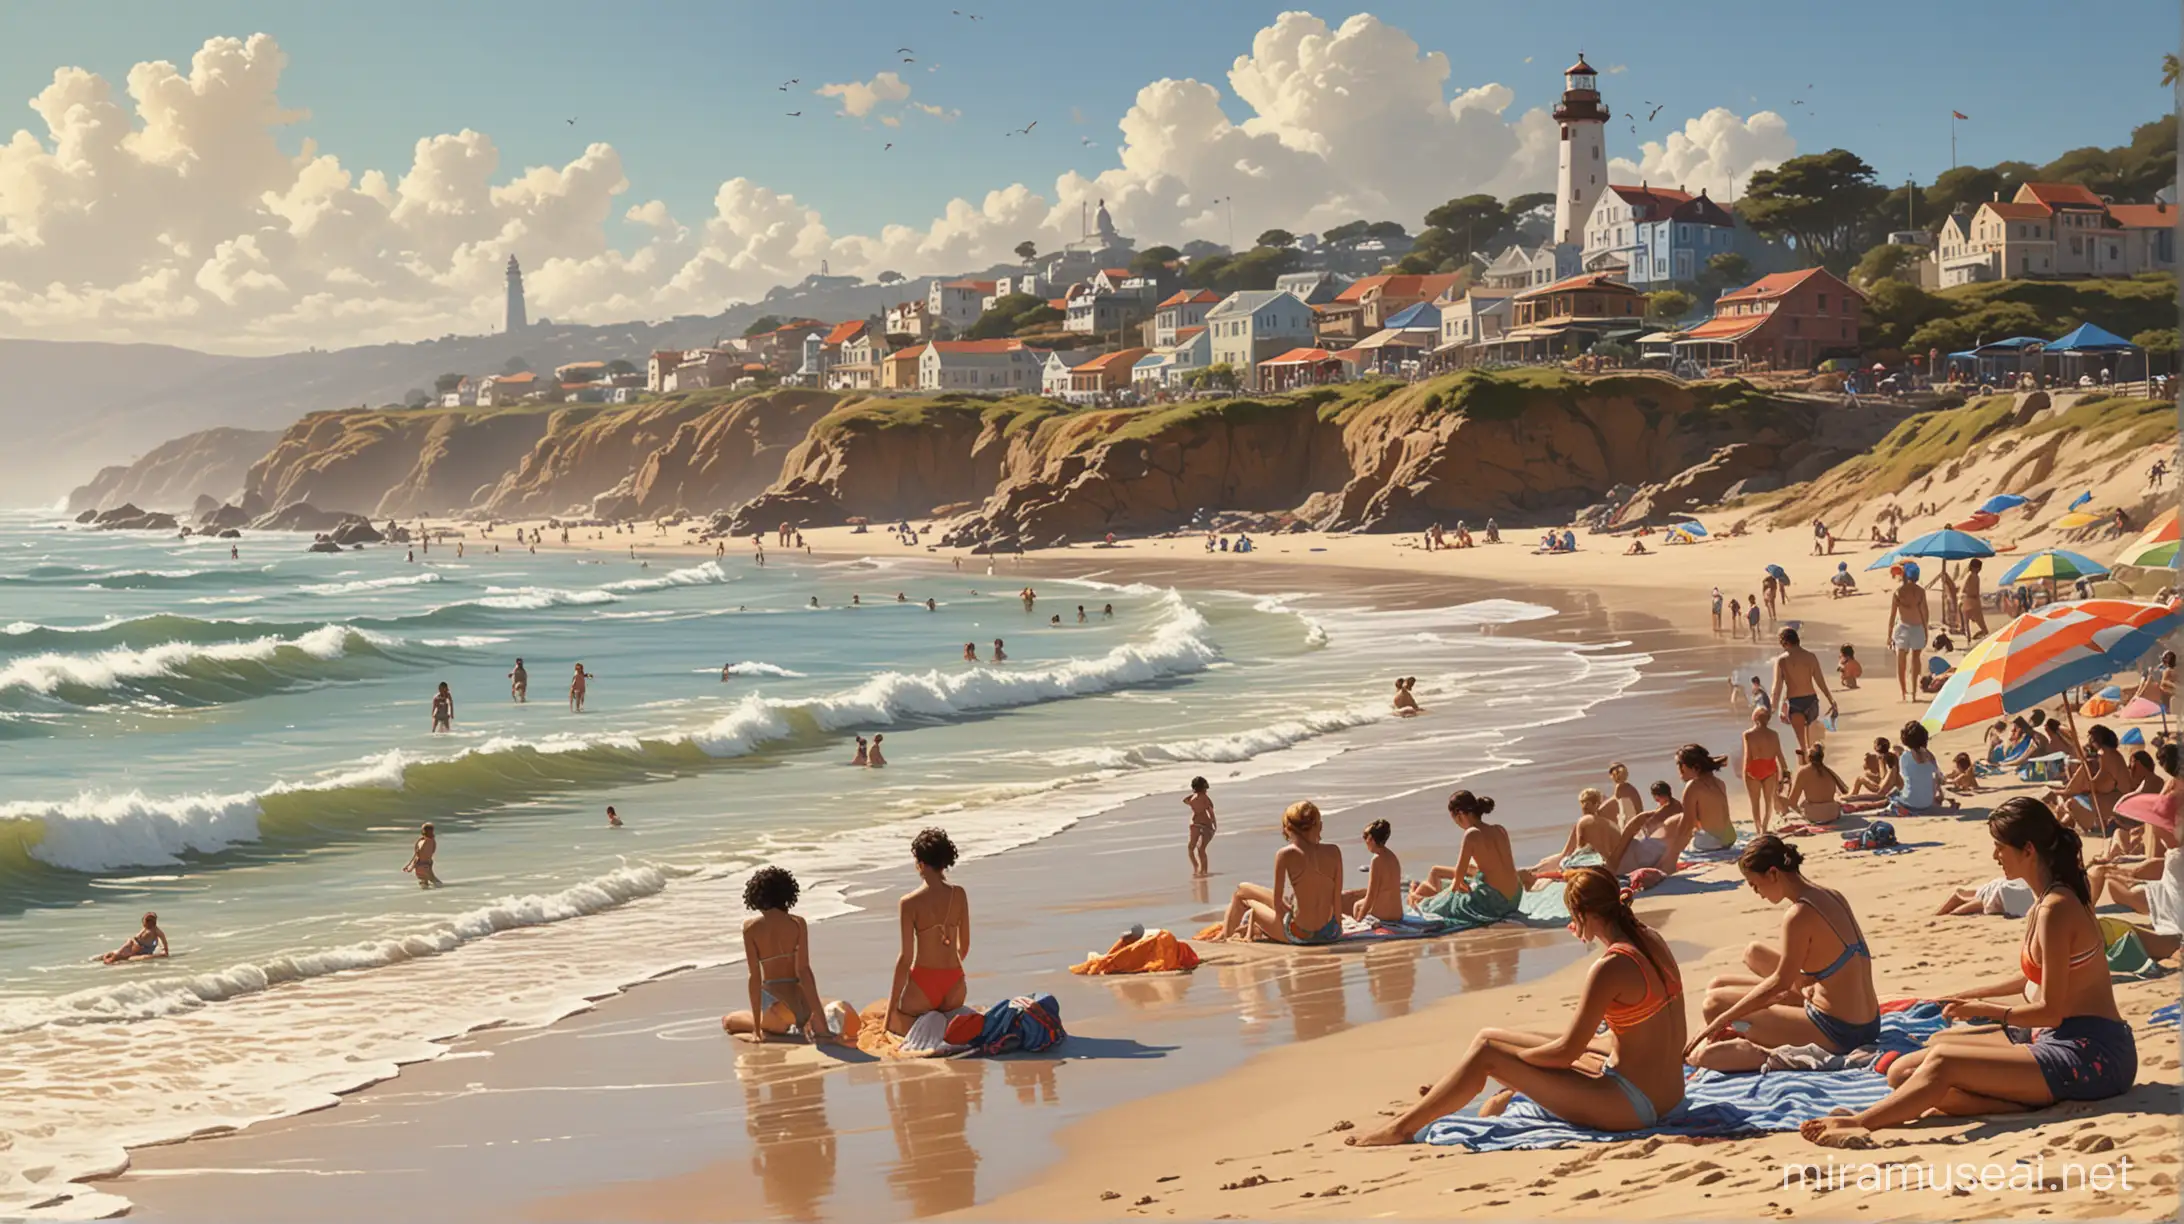 Realistic painting of a beach scene bustling with women of diverse ages and ethnicities, enjoying various activities. Some are sunbathing, others are playing volleyball, while a few are building sandcastles with children. The setting is sunny with clear blue skies and gentle waves lapping at the shore. Include details such as colorful beach umbrellas, striped towels, and a distant lighthouse. This scene should be captured with a vibrant palette and dynamic lighting, reminiscent of the works by Joaquín Sorolla, with a cinematic composition, trending on artstation.